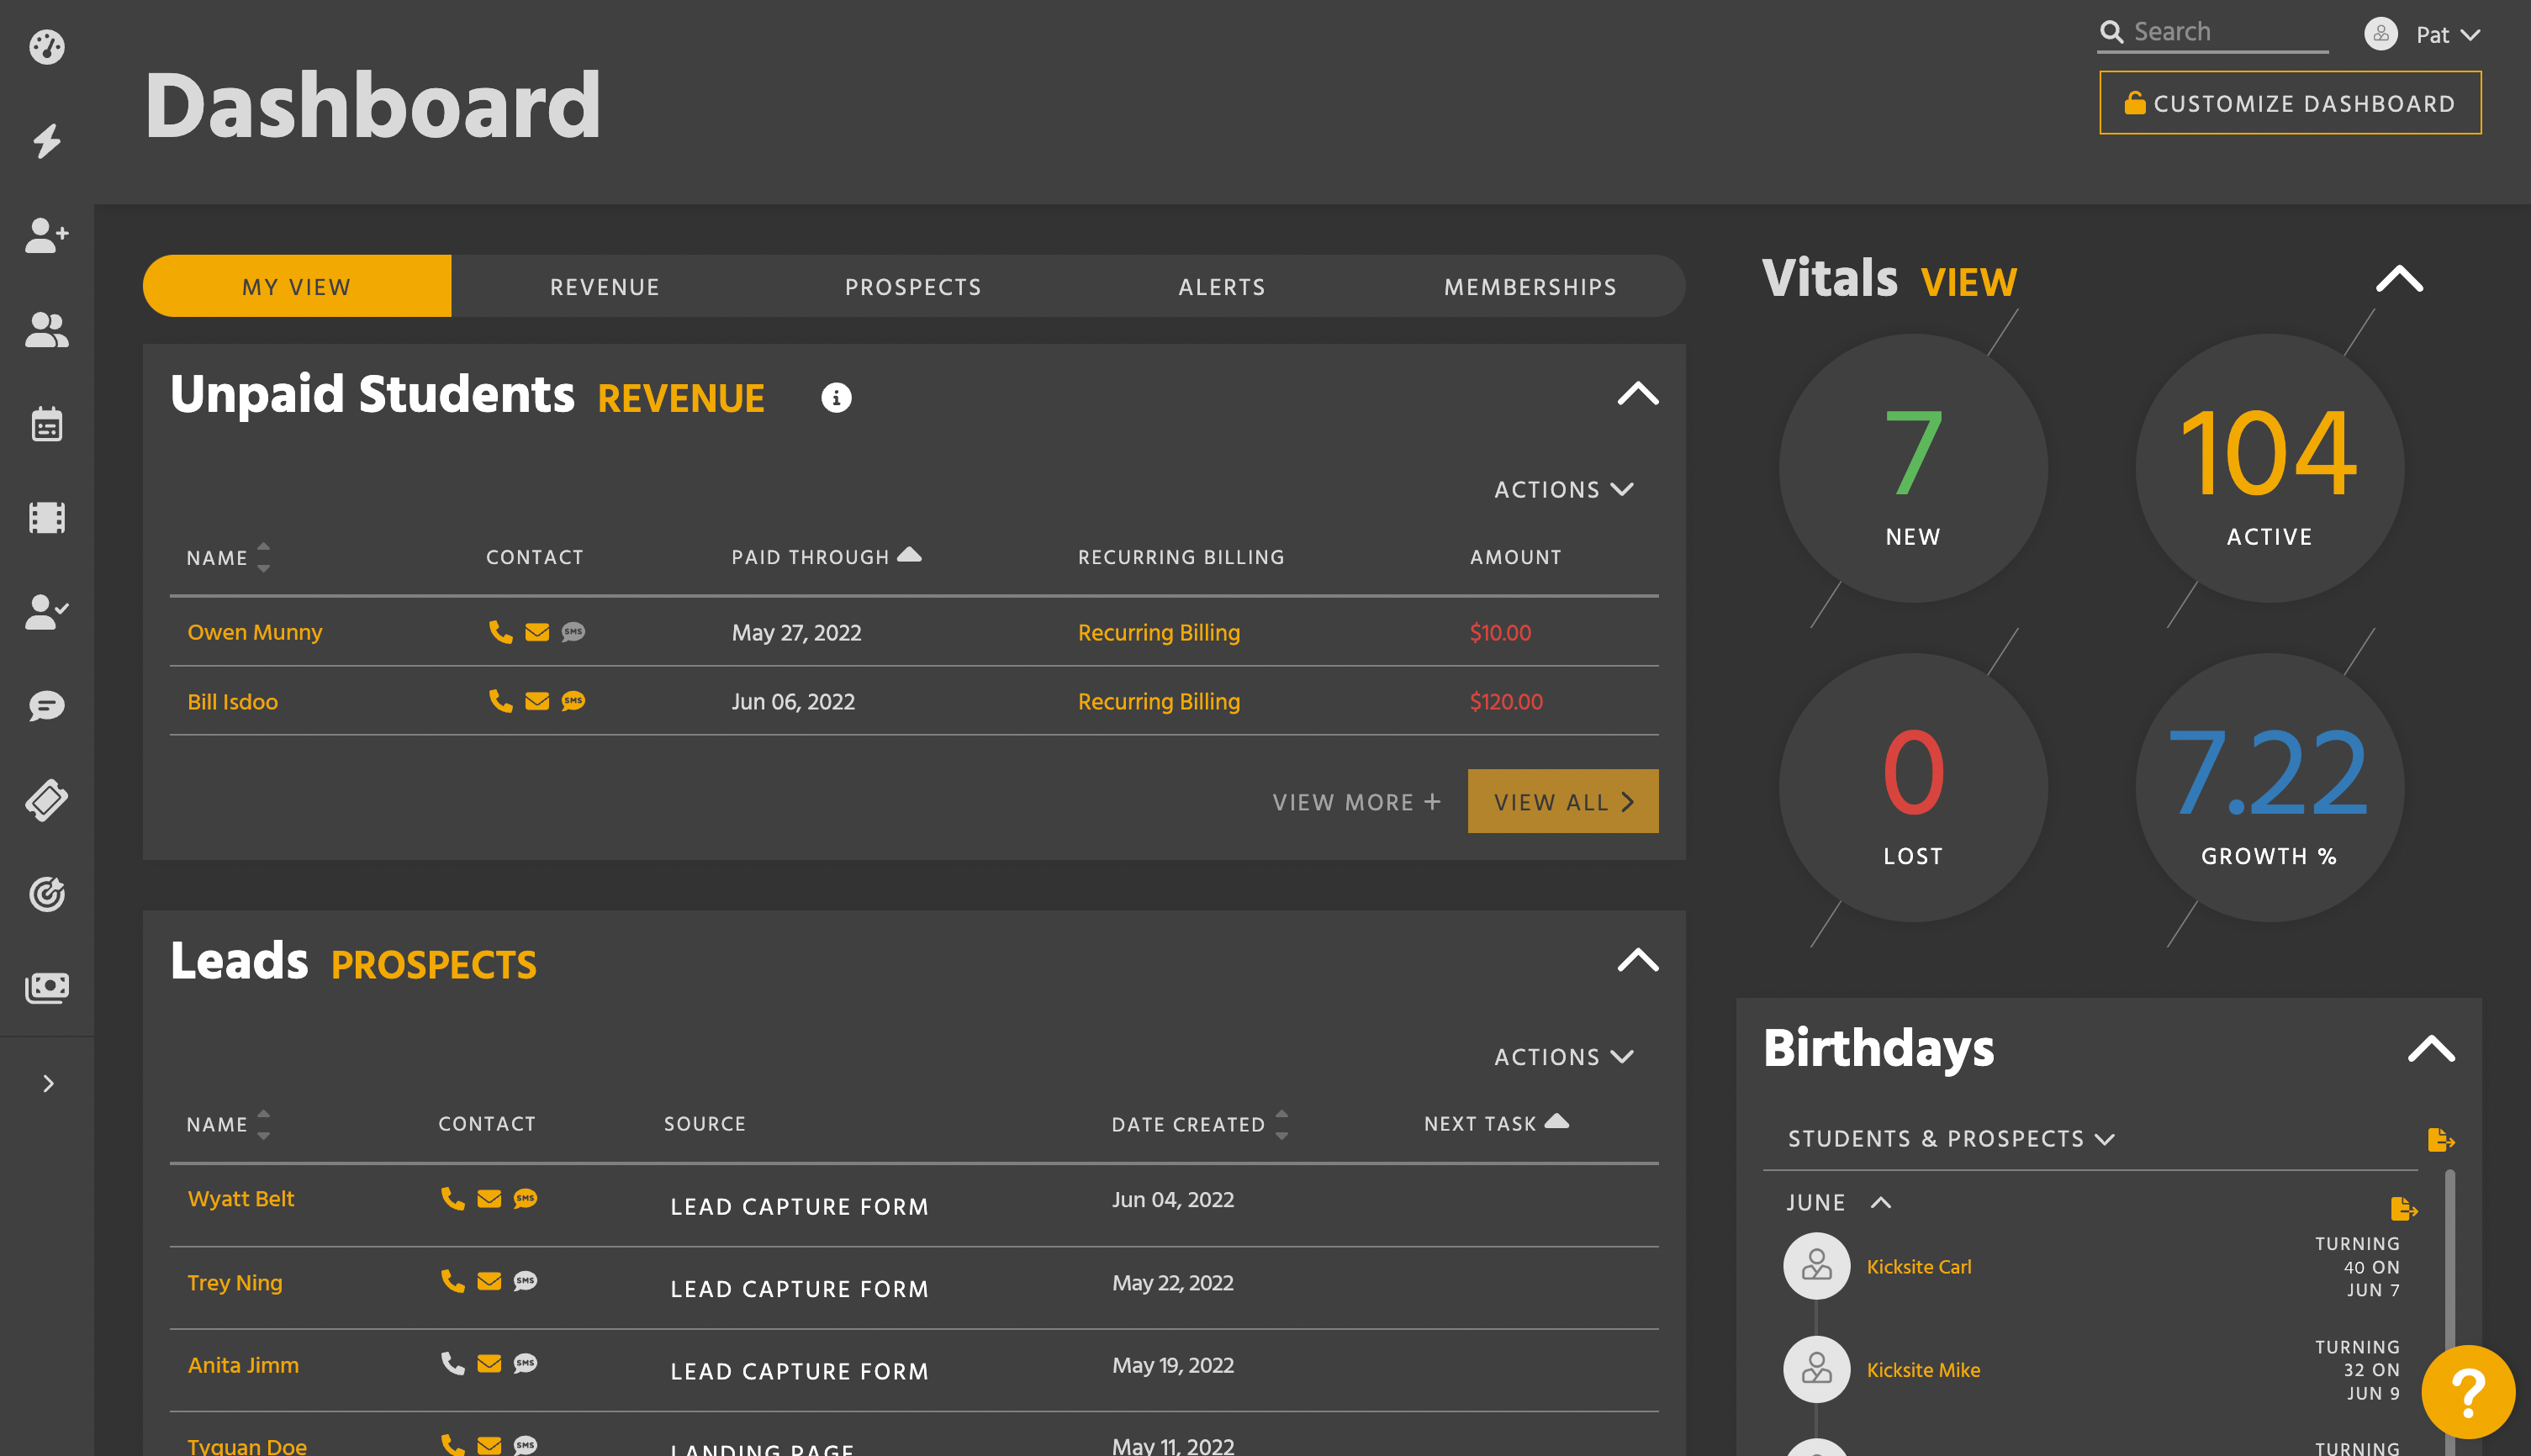 Dashboard | Quickly view key information like unpaid students and leads, plus access vitals reporting like revenue, growth and student conversion.